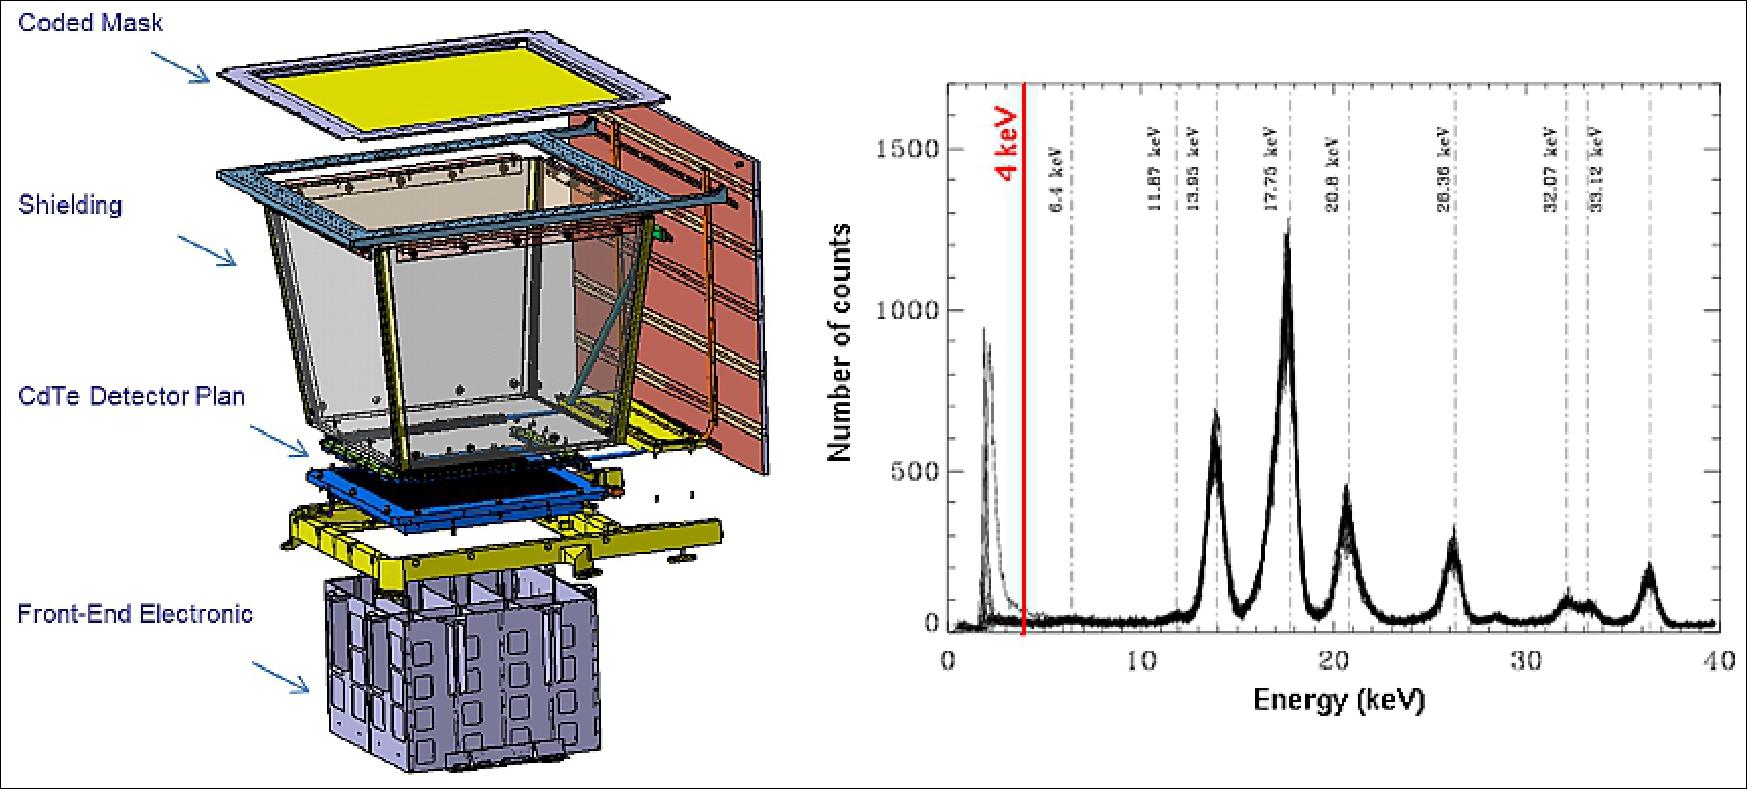 Figure 19: Left: Schematics showing the different subsystems of ECLAIRs except the data processing unit in charge of the GRB detection and localization. Right: Laboratory spectral measurements performed on a detector module prototype (a 32 CdTe pixel matrix) with radioactive sources (241Am). The red vertical line corresponds to the expected low energy threshold of the ECLAIRs camera (image credit: ECLAIRs collaboration)